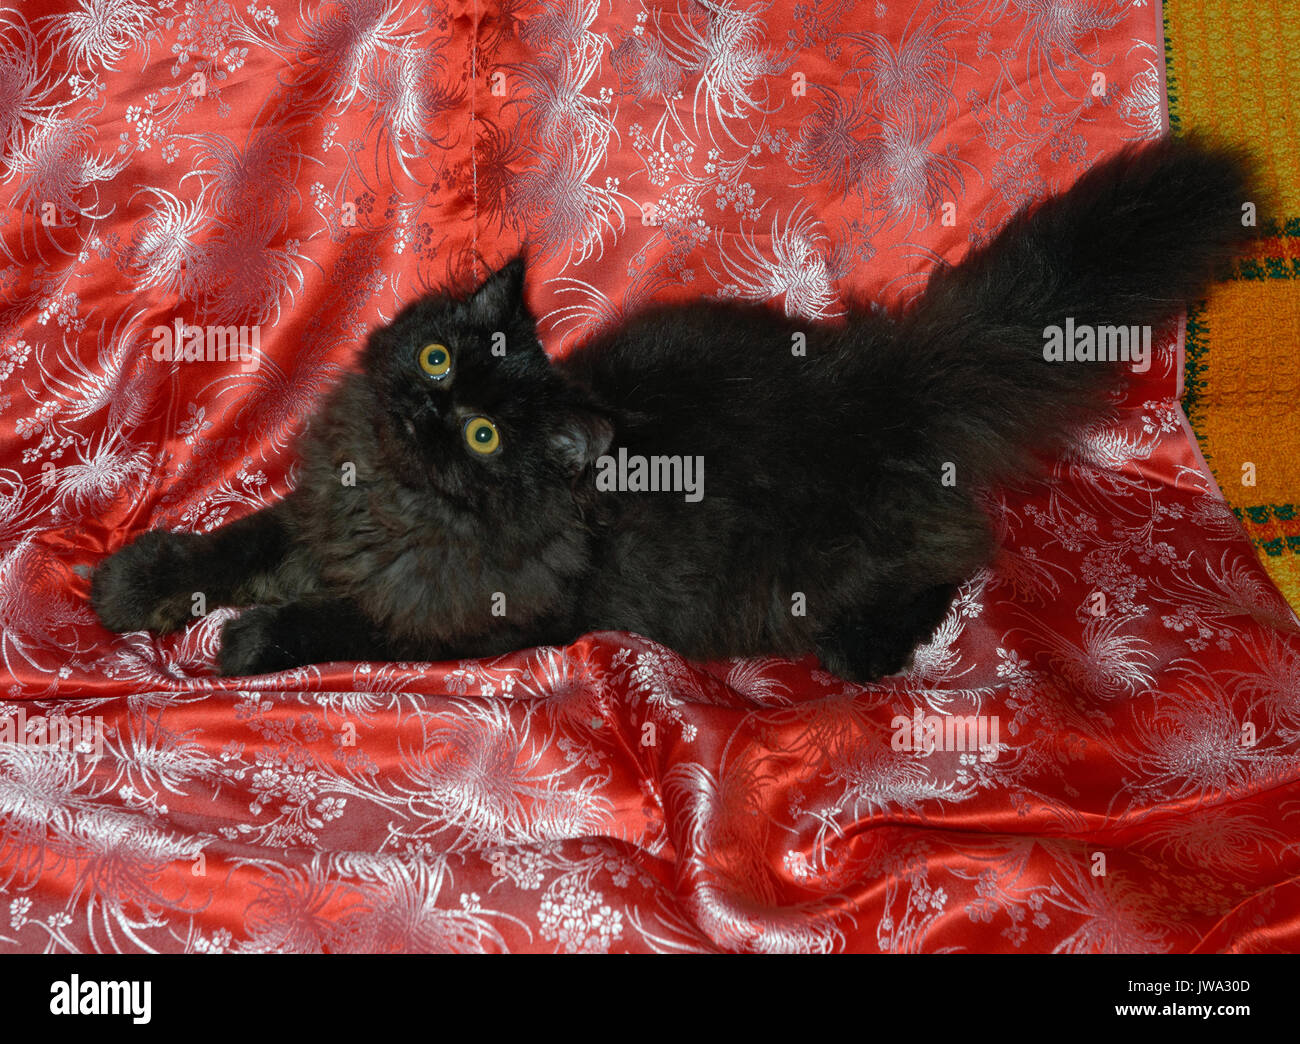 Close-up high angle view of black kitten that is on bright red sofa coverlet background. Stock Photo